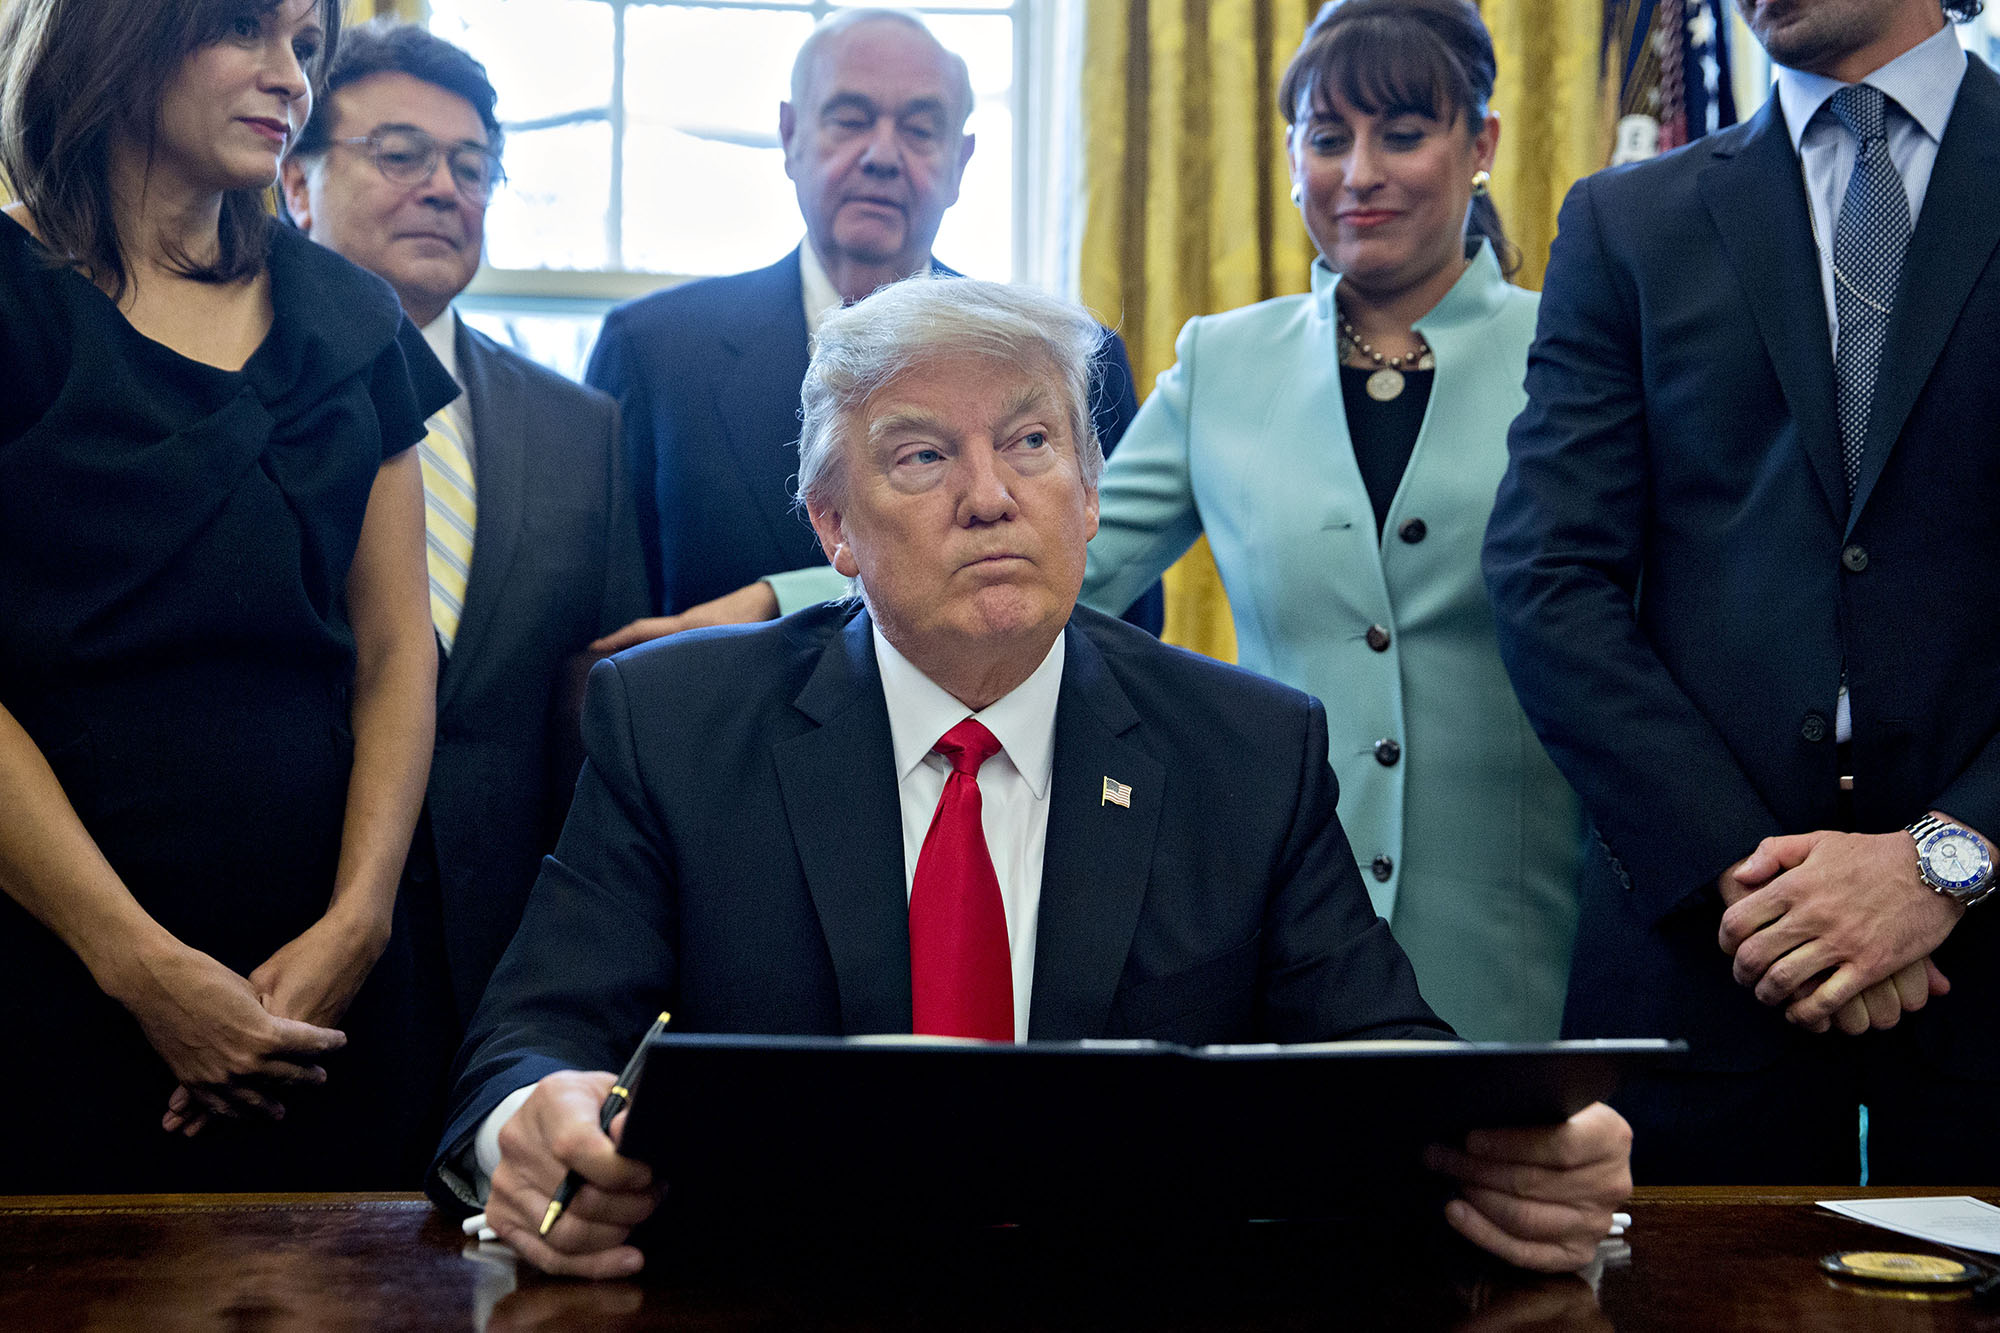 U.S. President Donald Trump pauses after signing an executive order. (Photographer: Andrew Harrer/Bloomberg via Getty Images) (Bloomberg&mdash;Bloomberg via Getty Images)